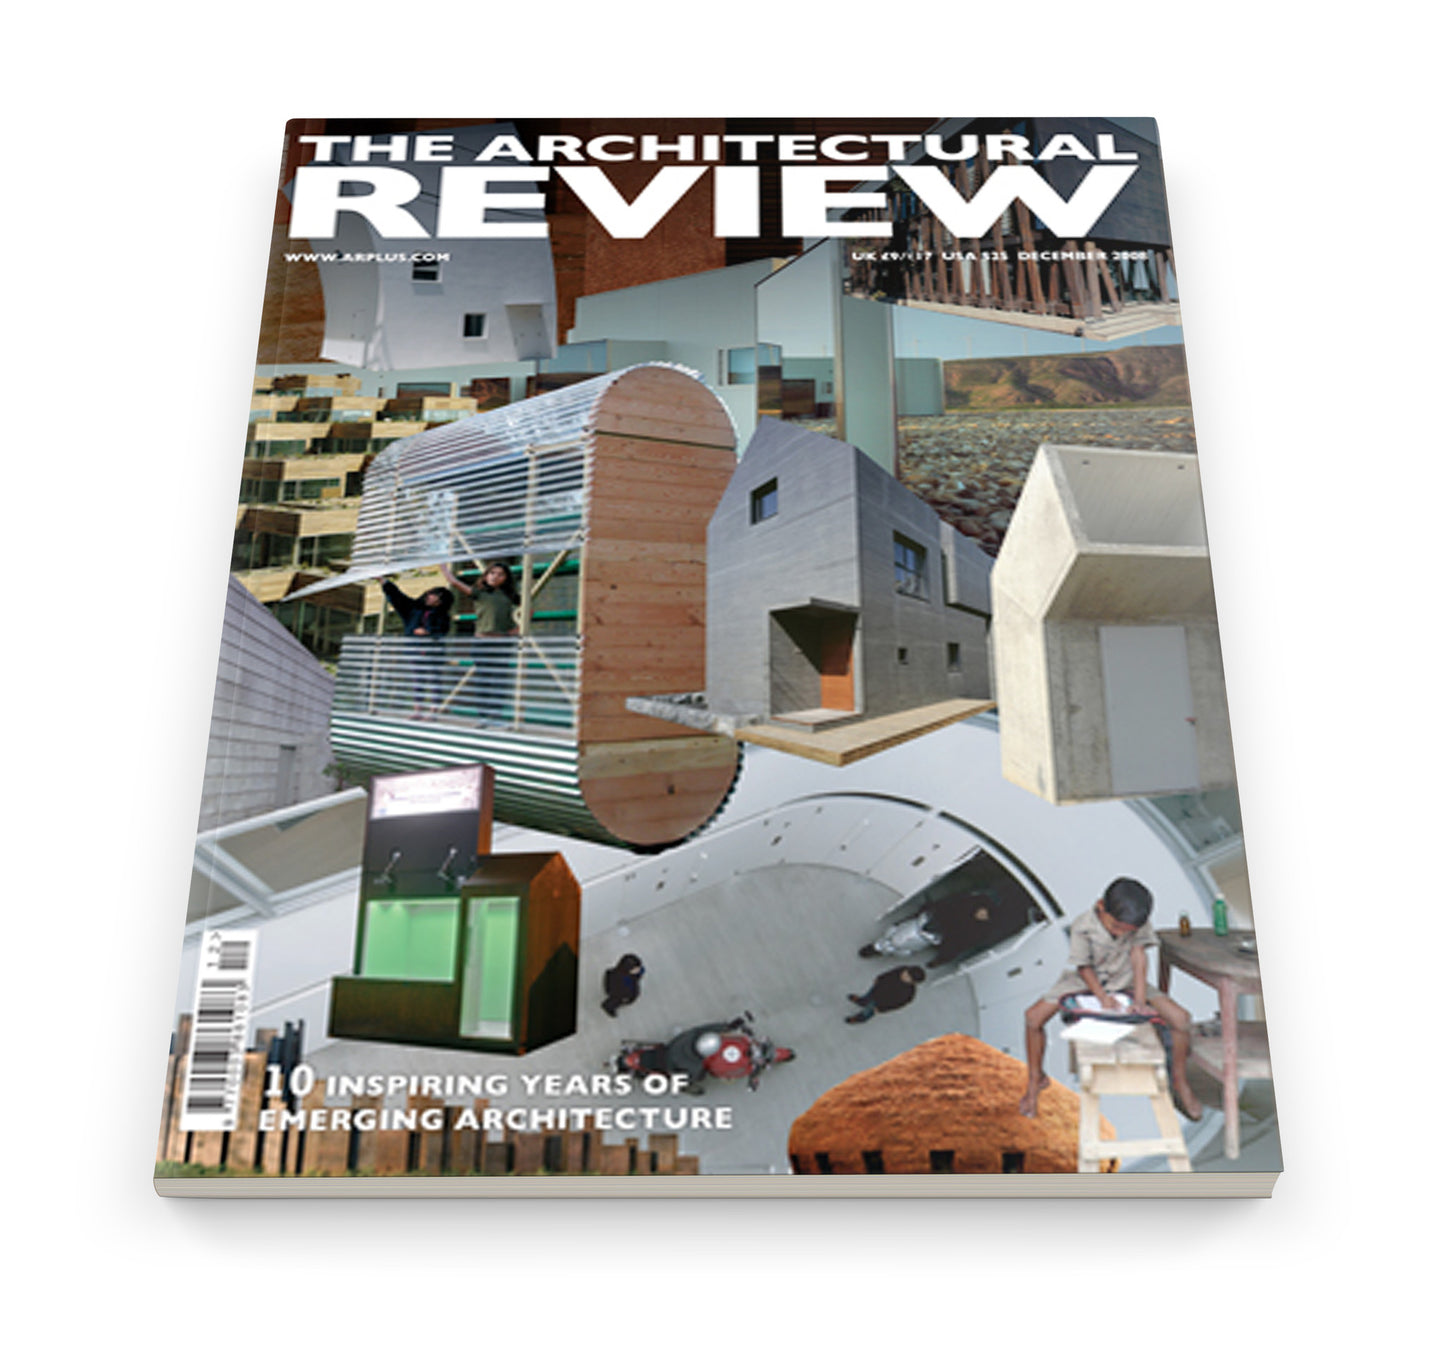 The Architectural Review Issue 1319, January 2007